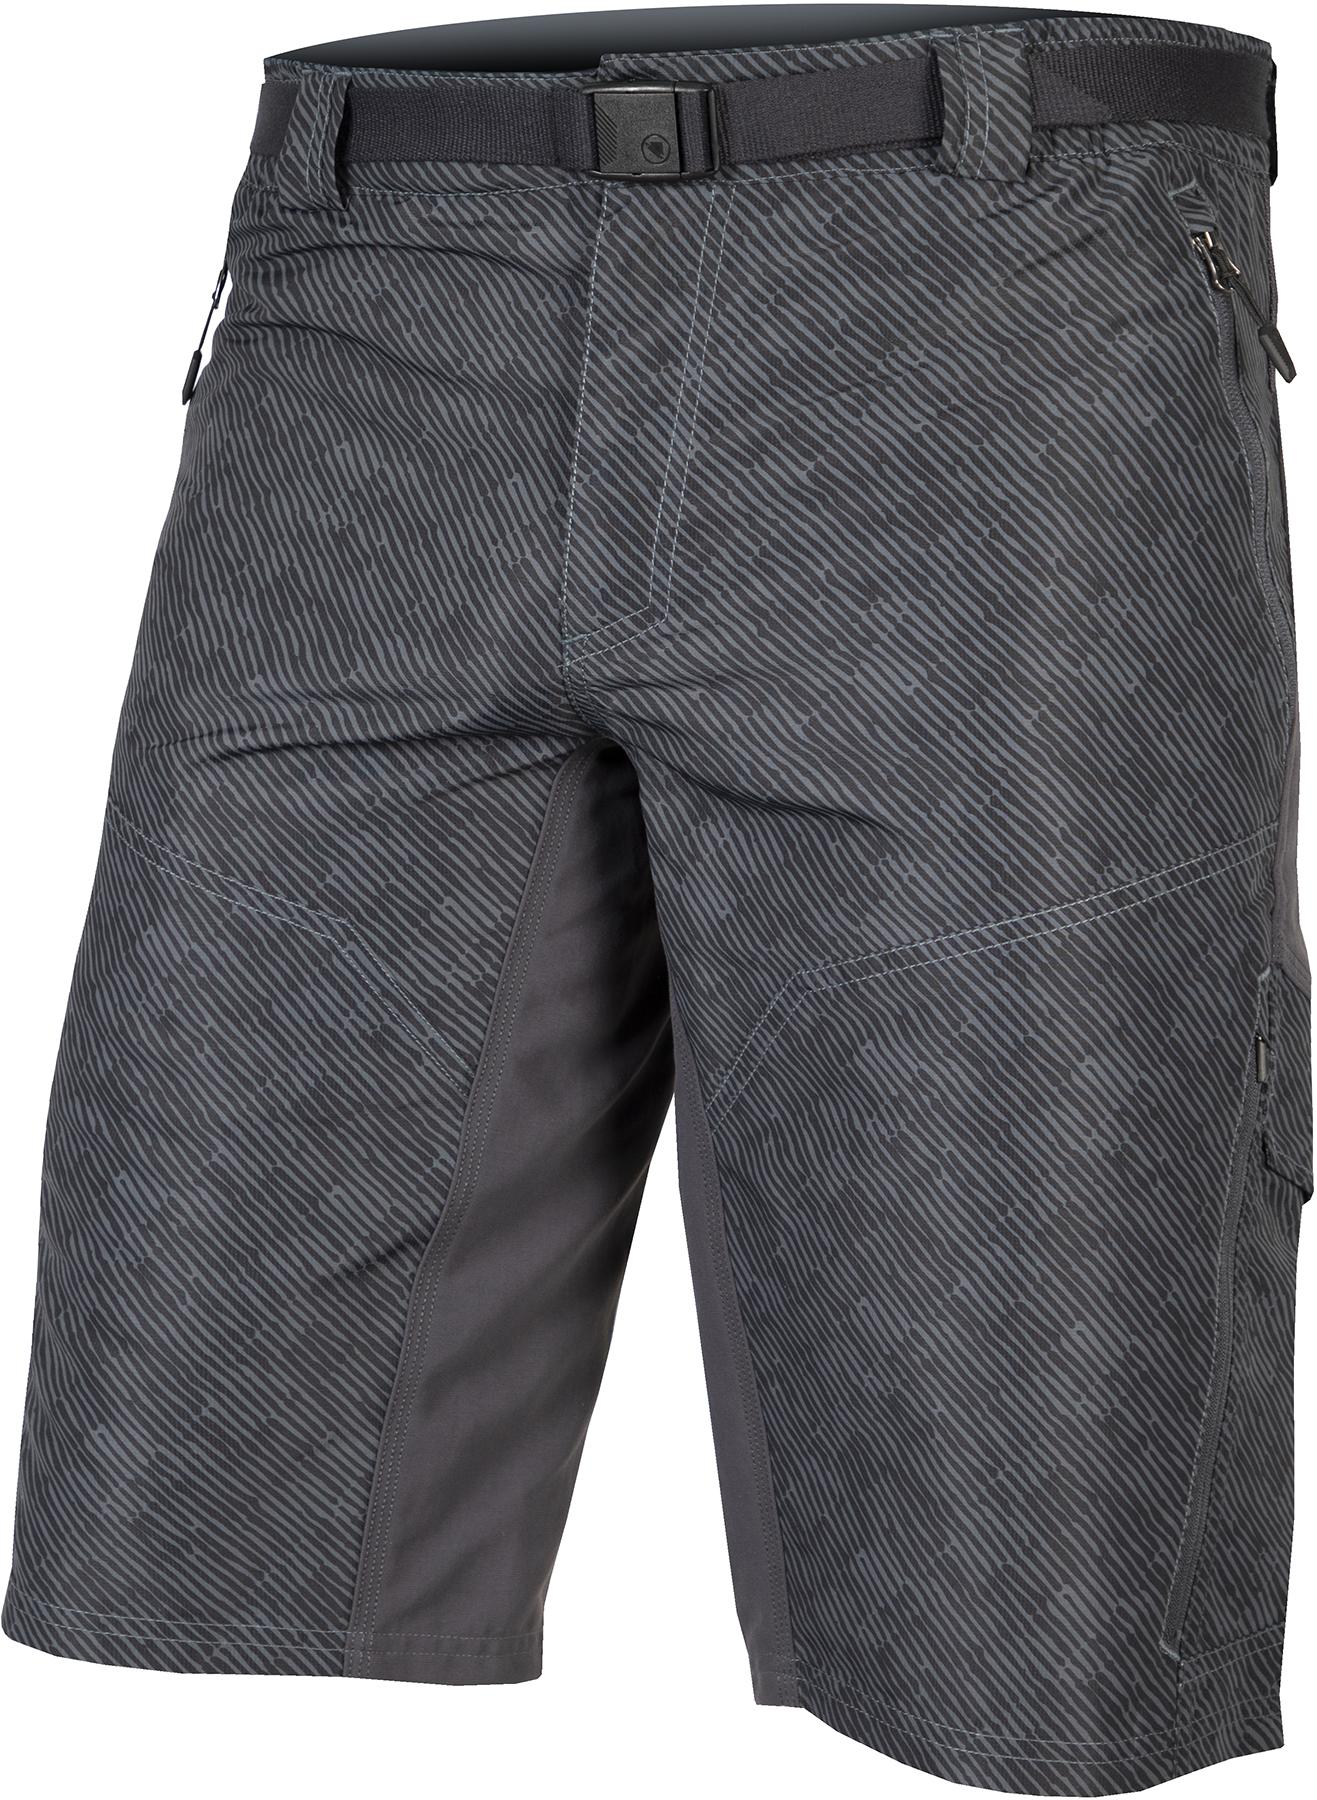 Endura Hummvee Short With Liner - Anthracite